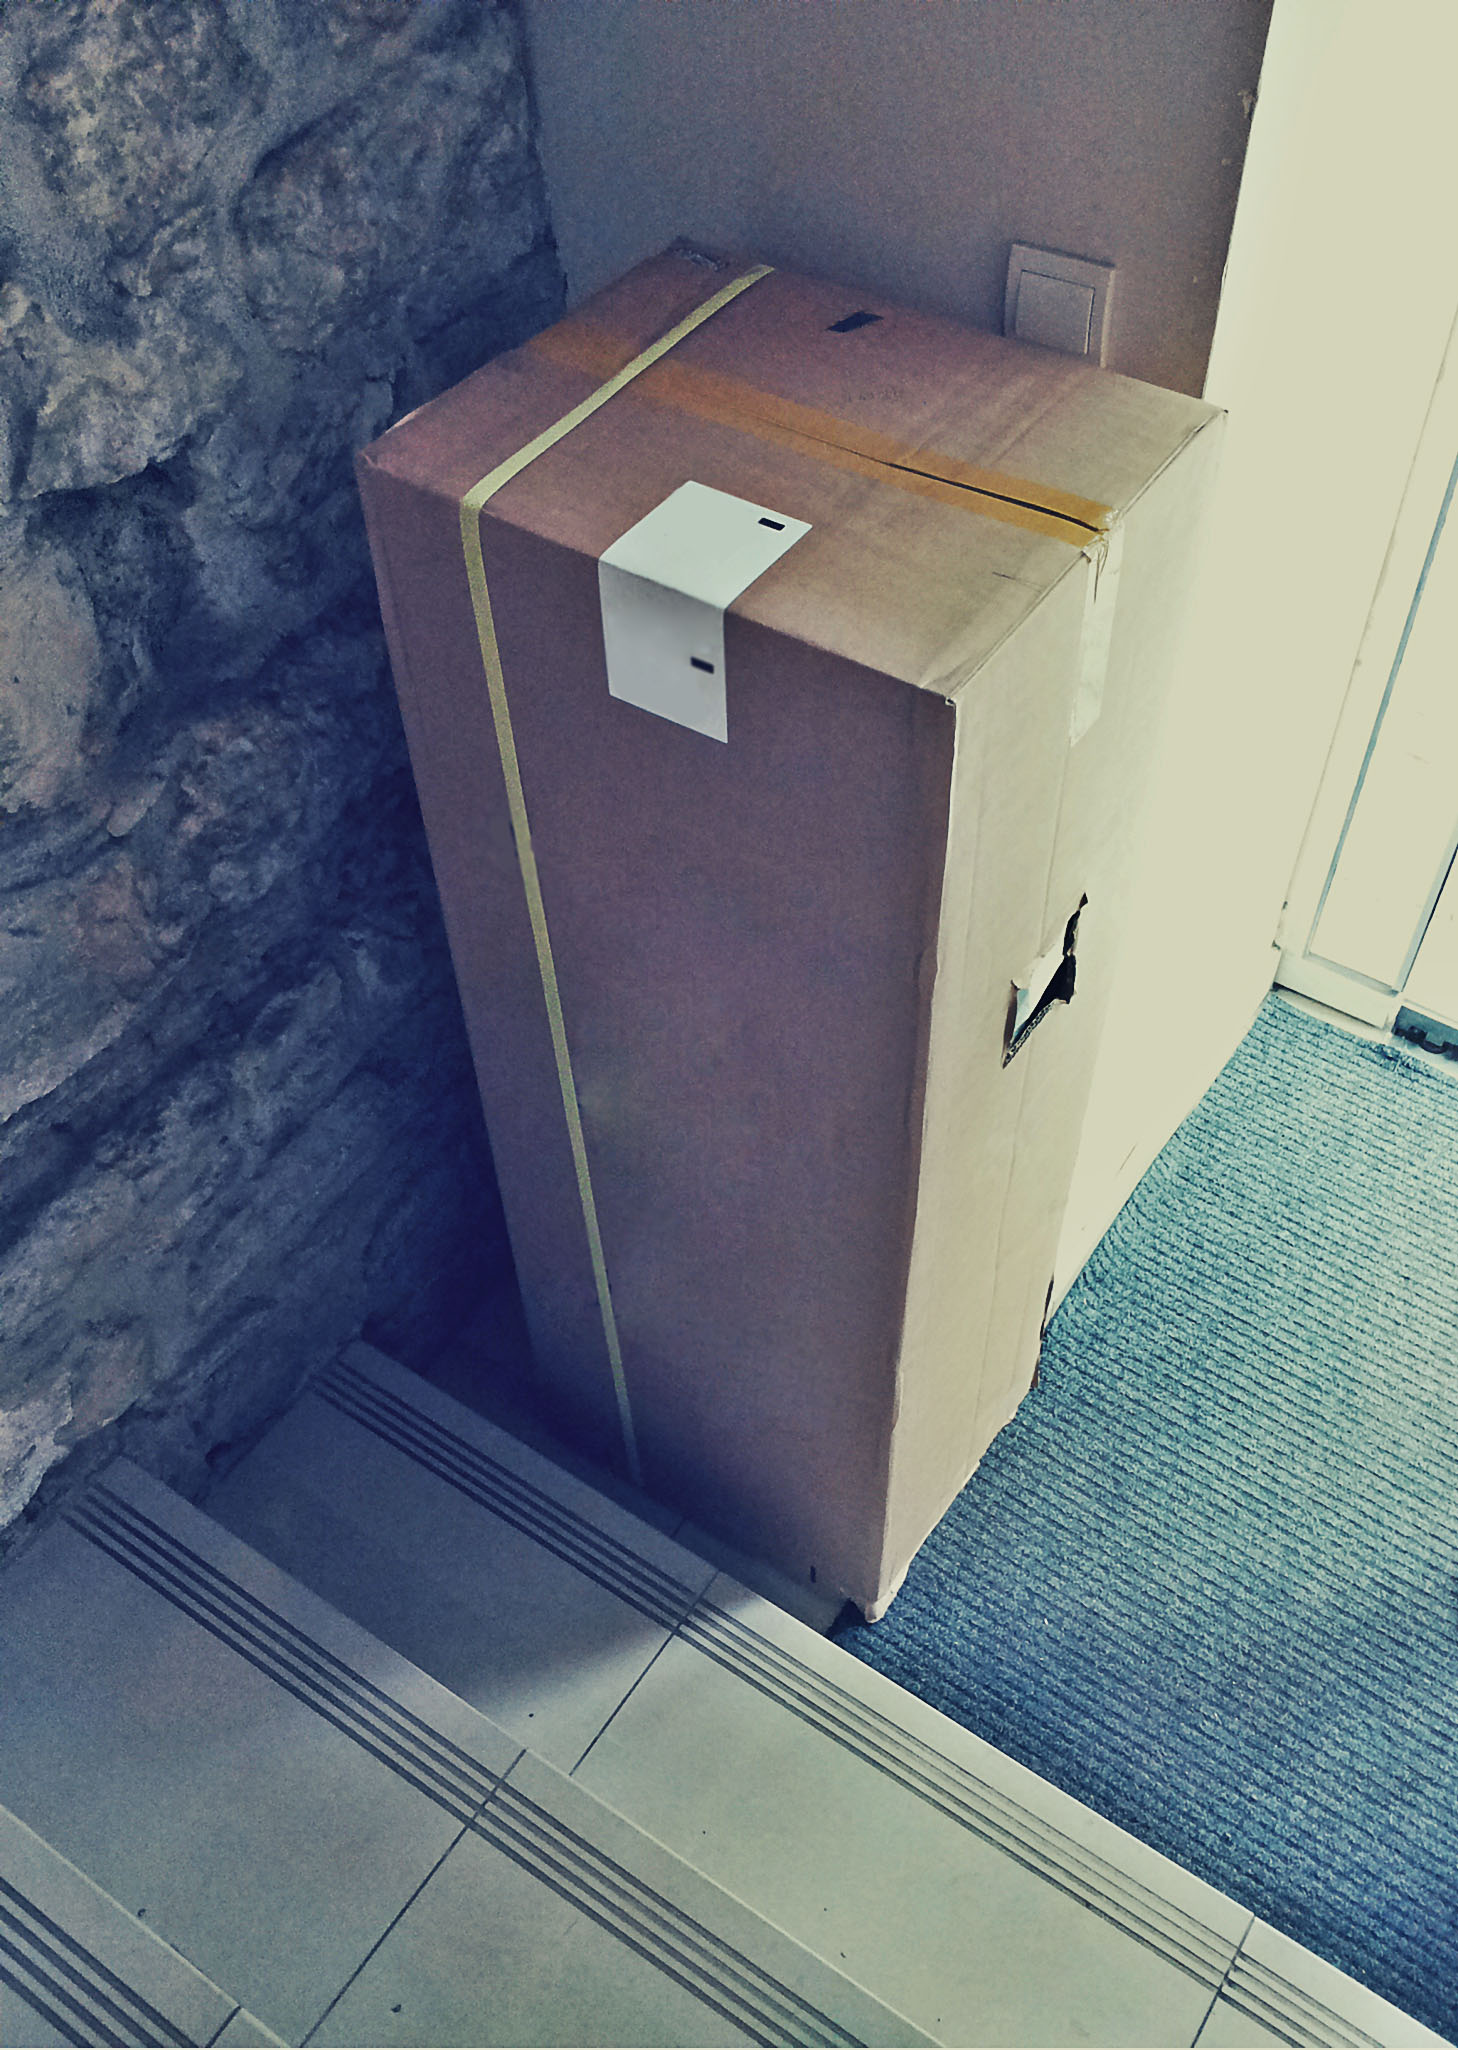 a cardboard box next to a doorway with some stones on it